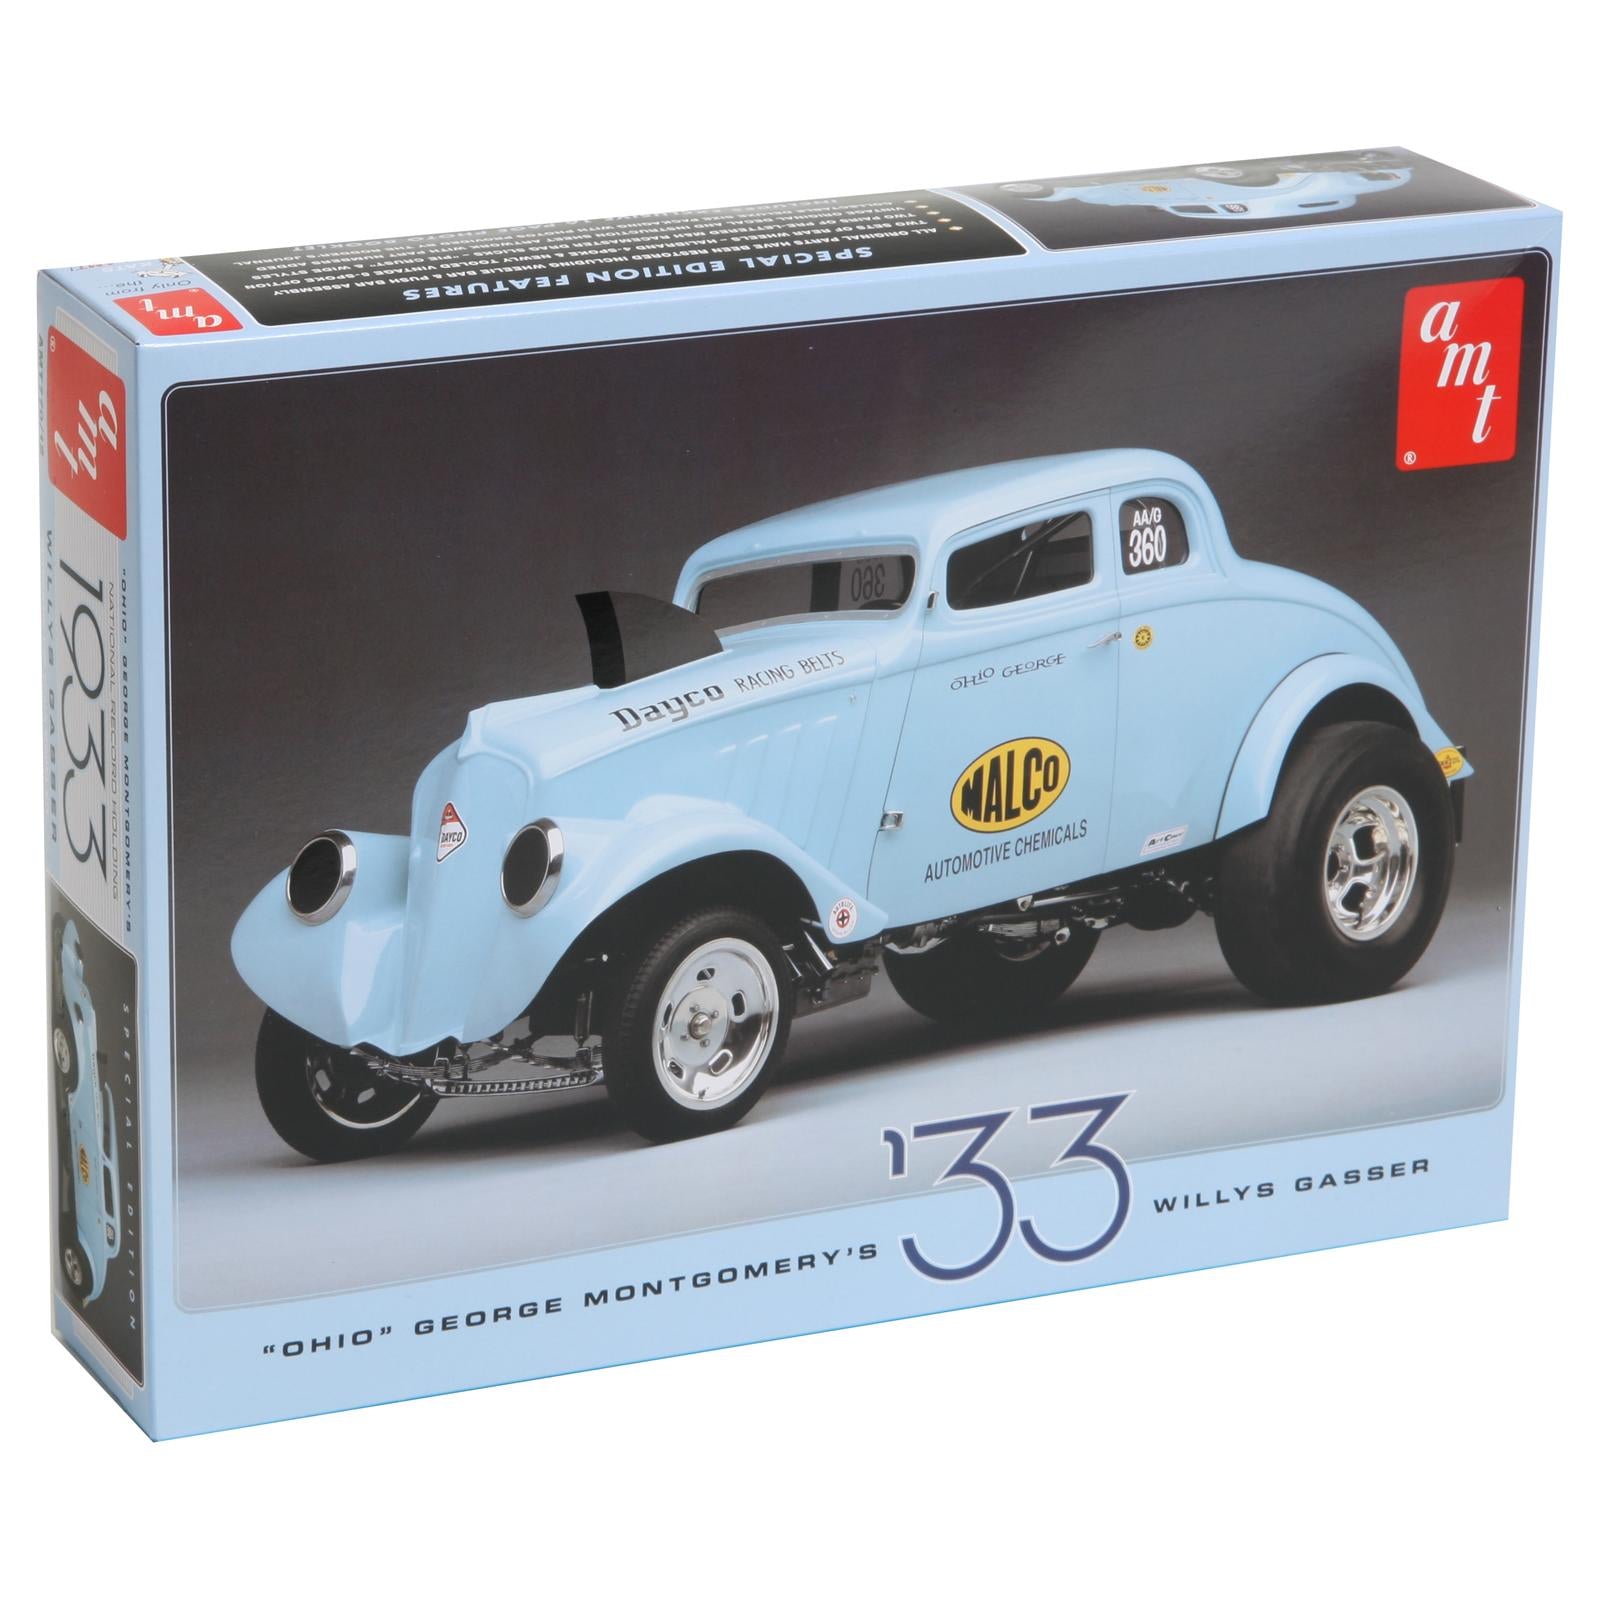 AMT 770 1/25 1933 Willys Gasser Special Edition